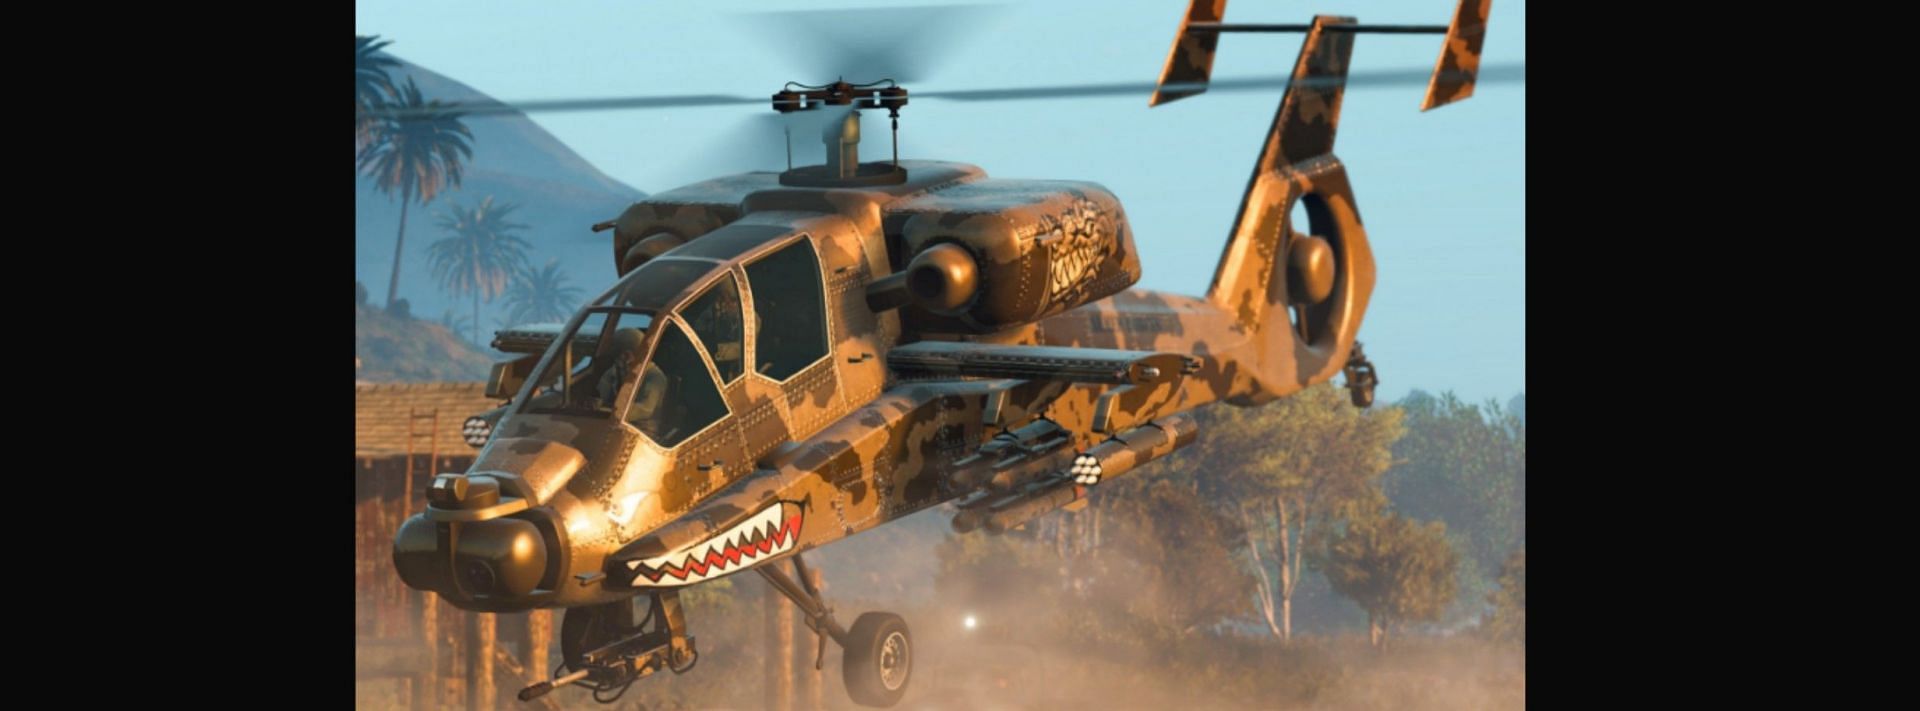 The FH-1 Hunter helicopter in GTA Online (Image via Rockstar Games)